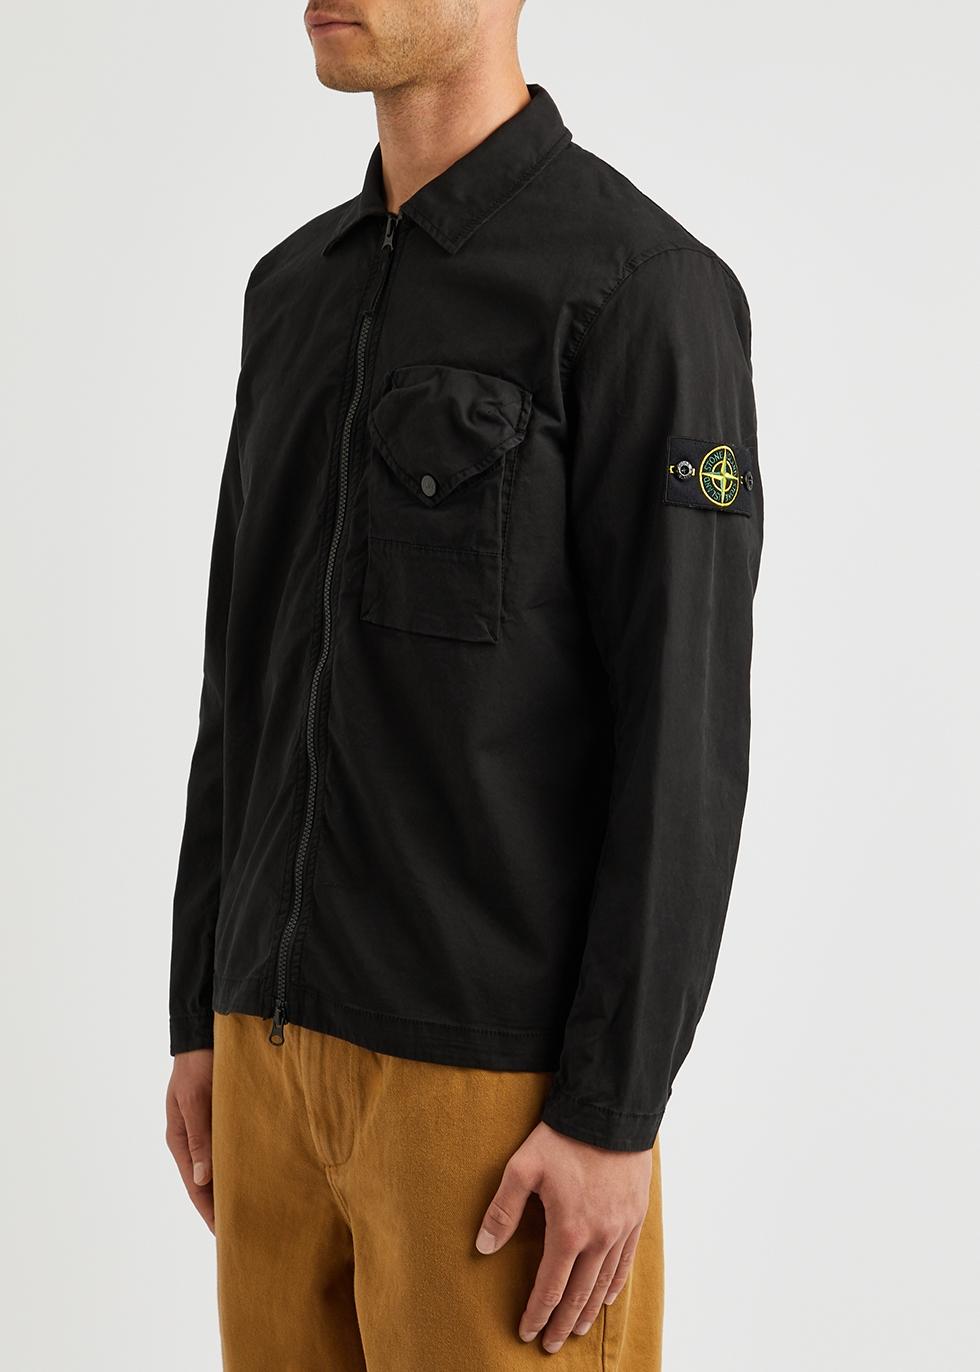 Stone Island Logo Stretch-cotton Overshirt in Black for Men | Lyst